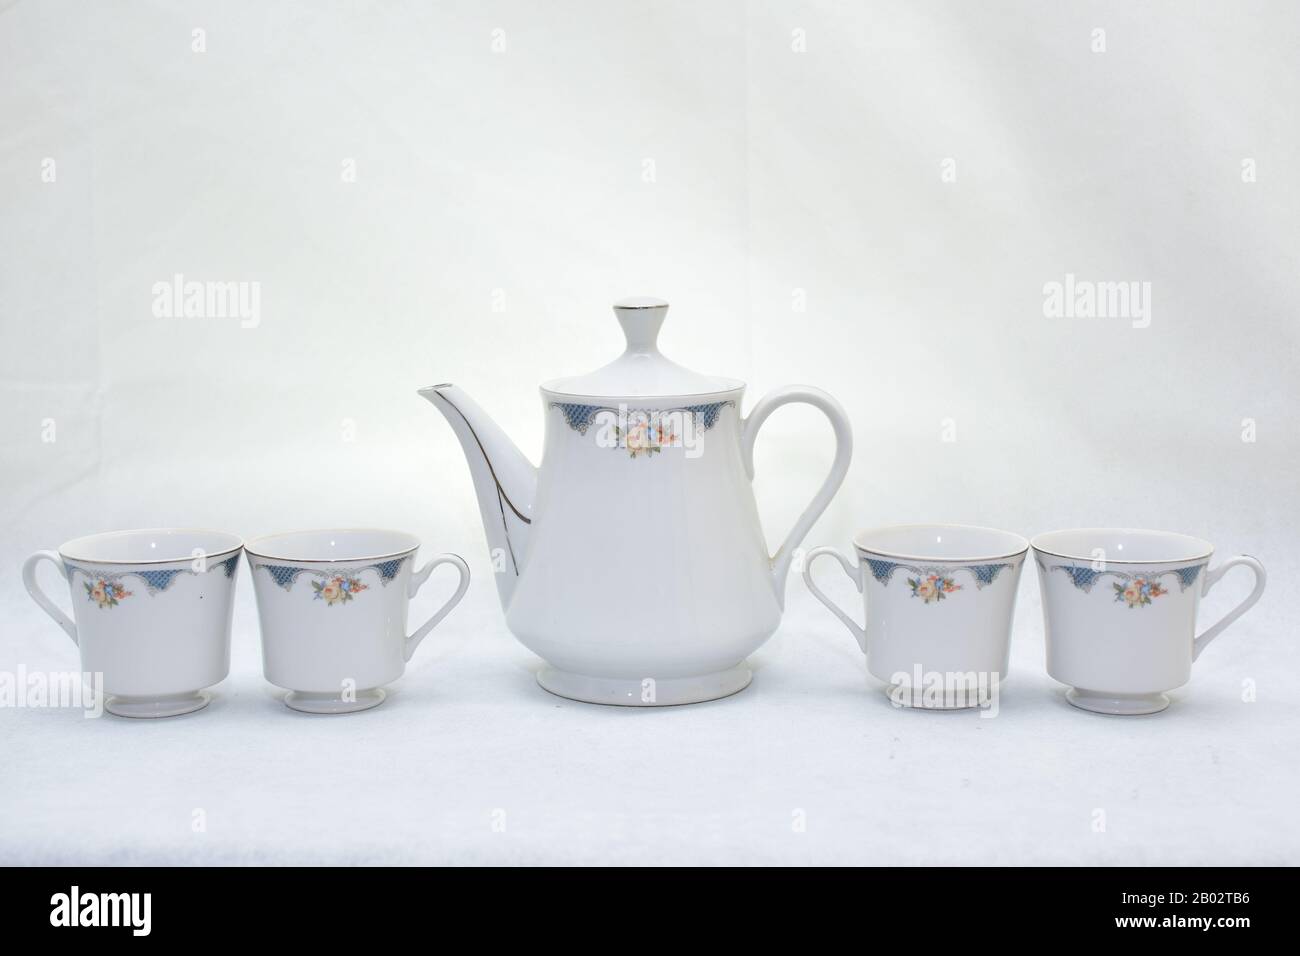 Download Mock Up Design Set Of Elegant And Traditional Teapot Colorful White And Blue Coffee Cup Tea Cup On Cup S Plate Beside The Hot Tea Pot Design Dr Stock Photo Alamy